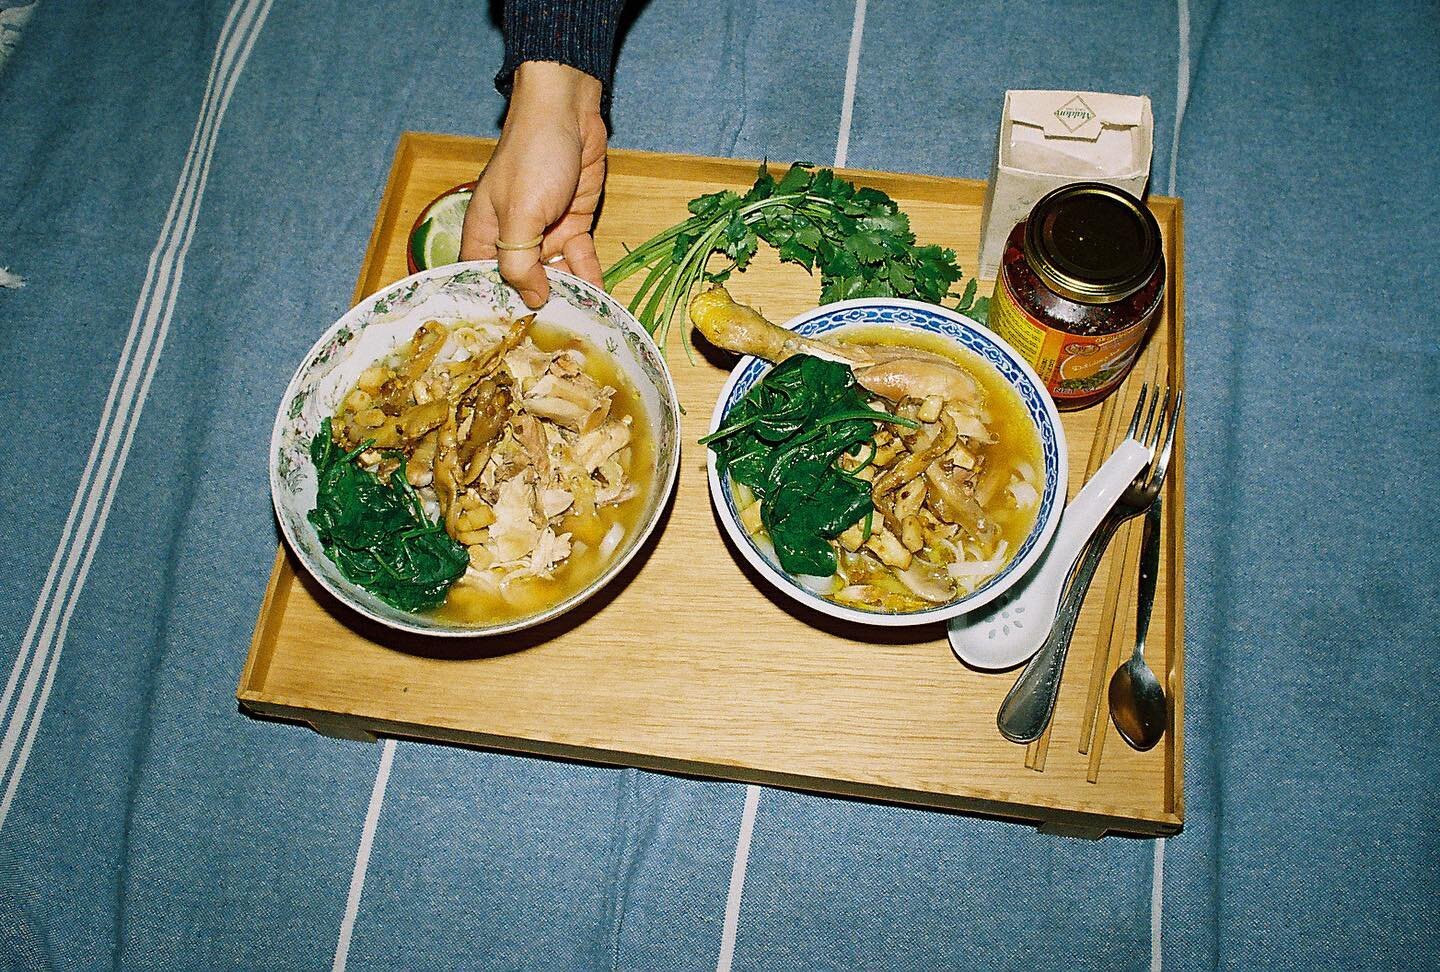 22.02.2022
My heart lives in the love I get to witness and share in this lifetime 💫
.
.
.
#chickennoodlesoup #documentlove #storytelling #35mm #filmcommunity #filmisnotdead #somewheremag #foammagazine #formatmag #uncertainmag #etczine #broadmag #som